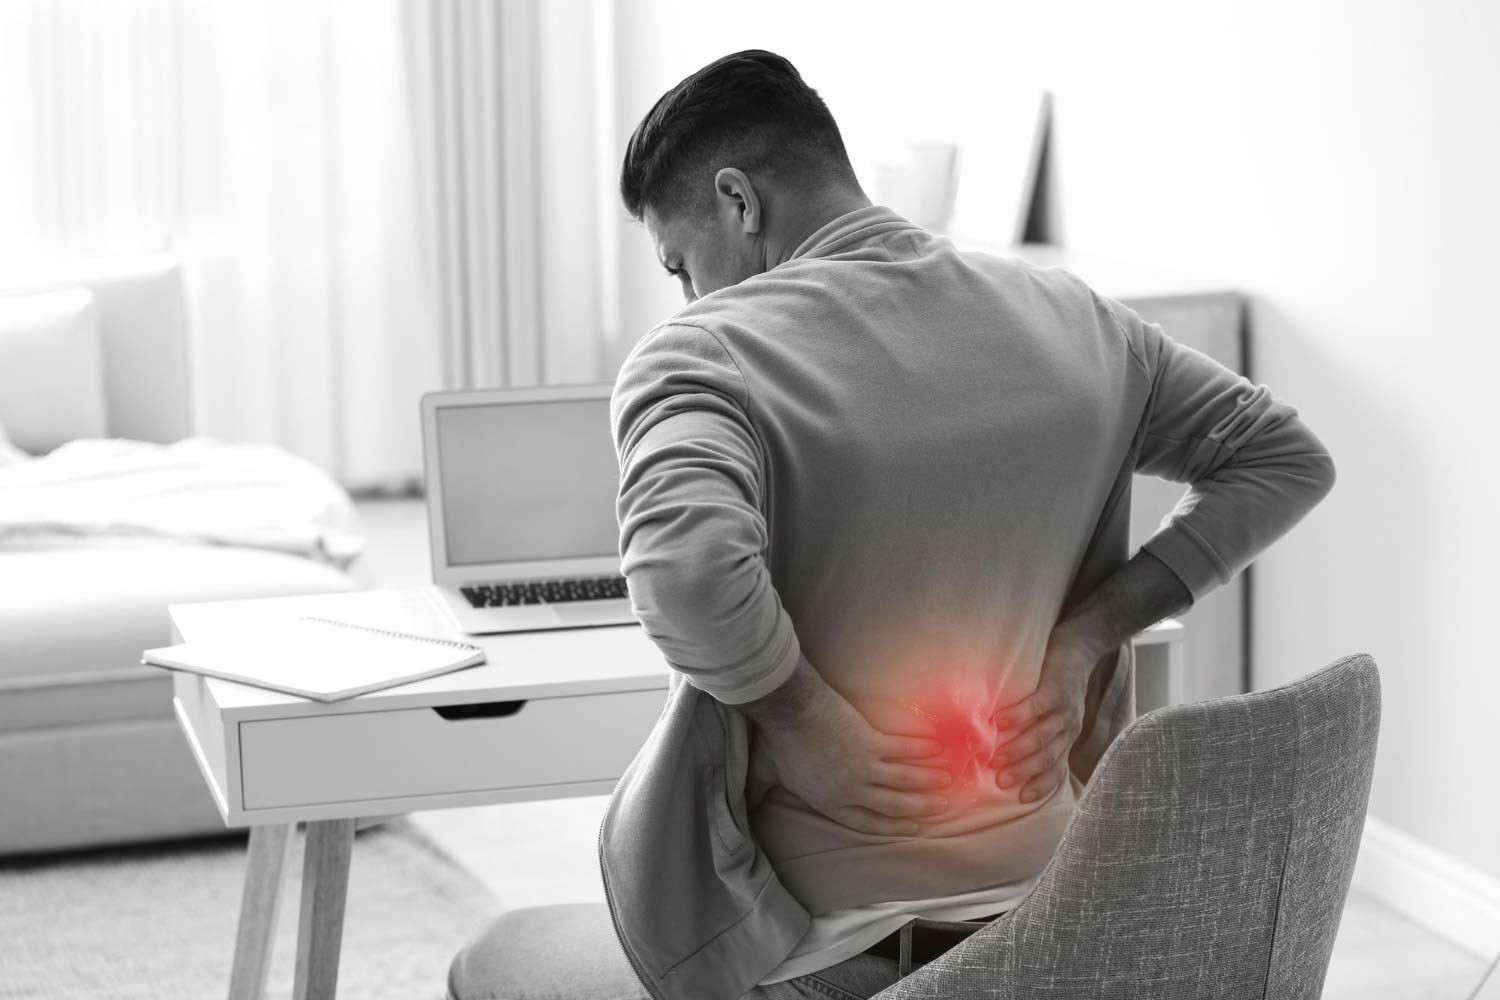 Man suffering from back pain at workplace bad posture problem